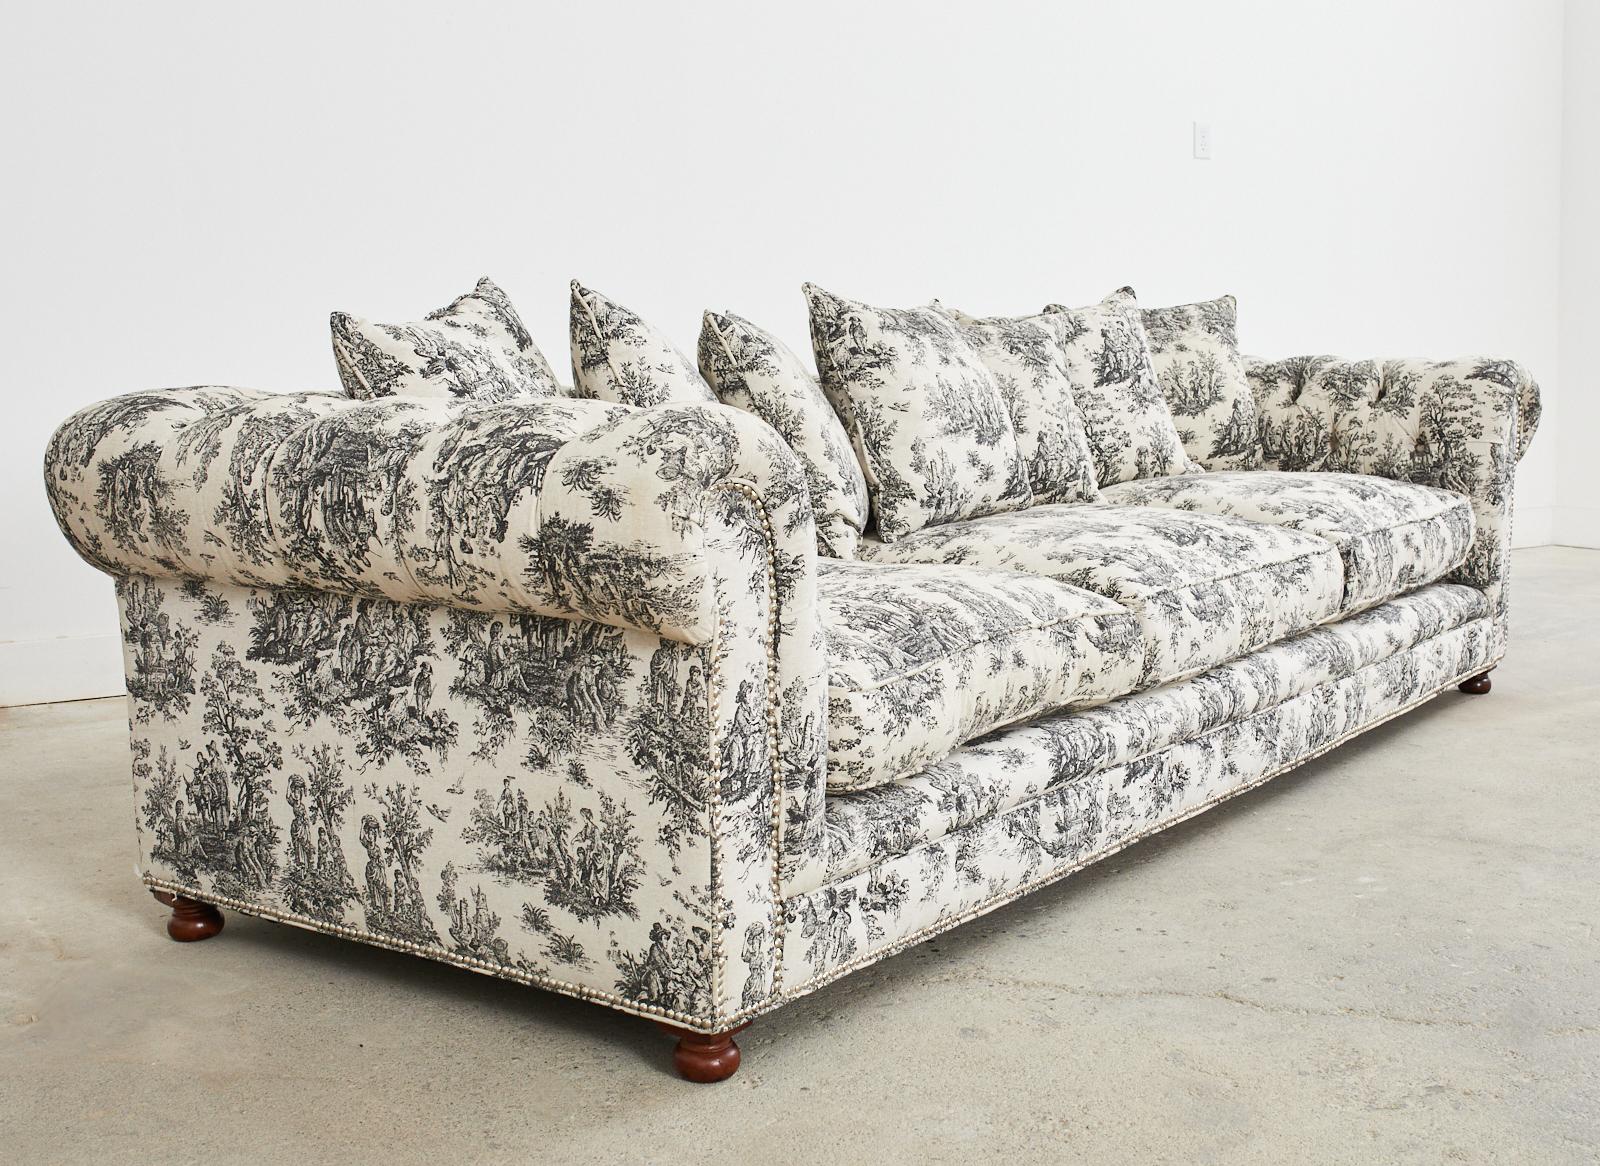 American Christian Audigier Grande-Dame French Provincial Toile Tufted Sofa For Sale